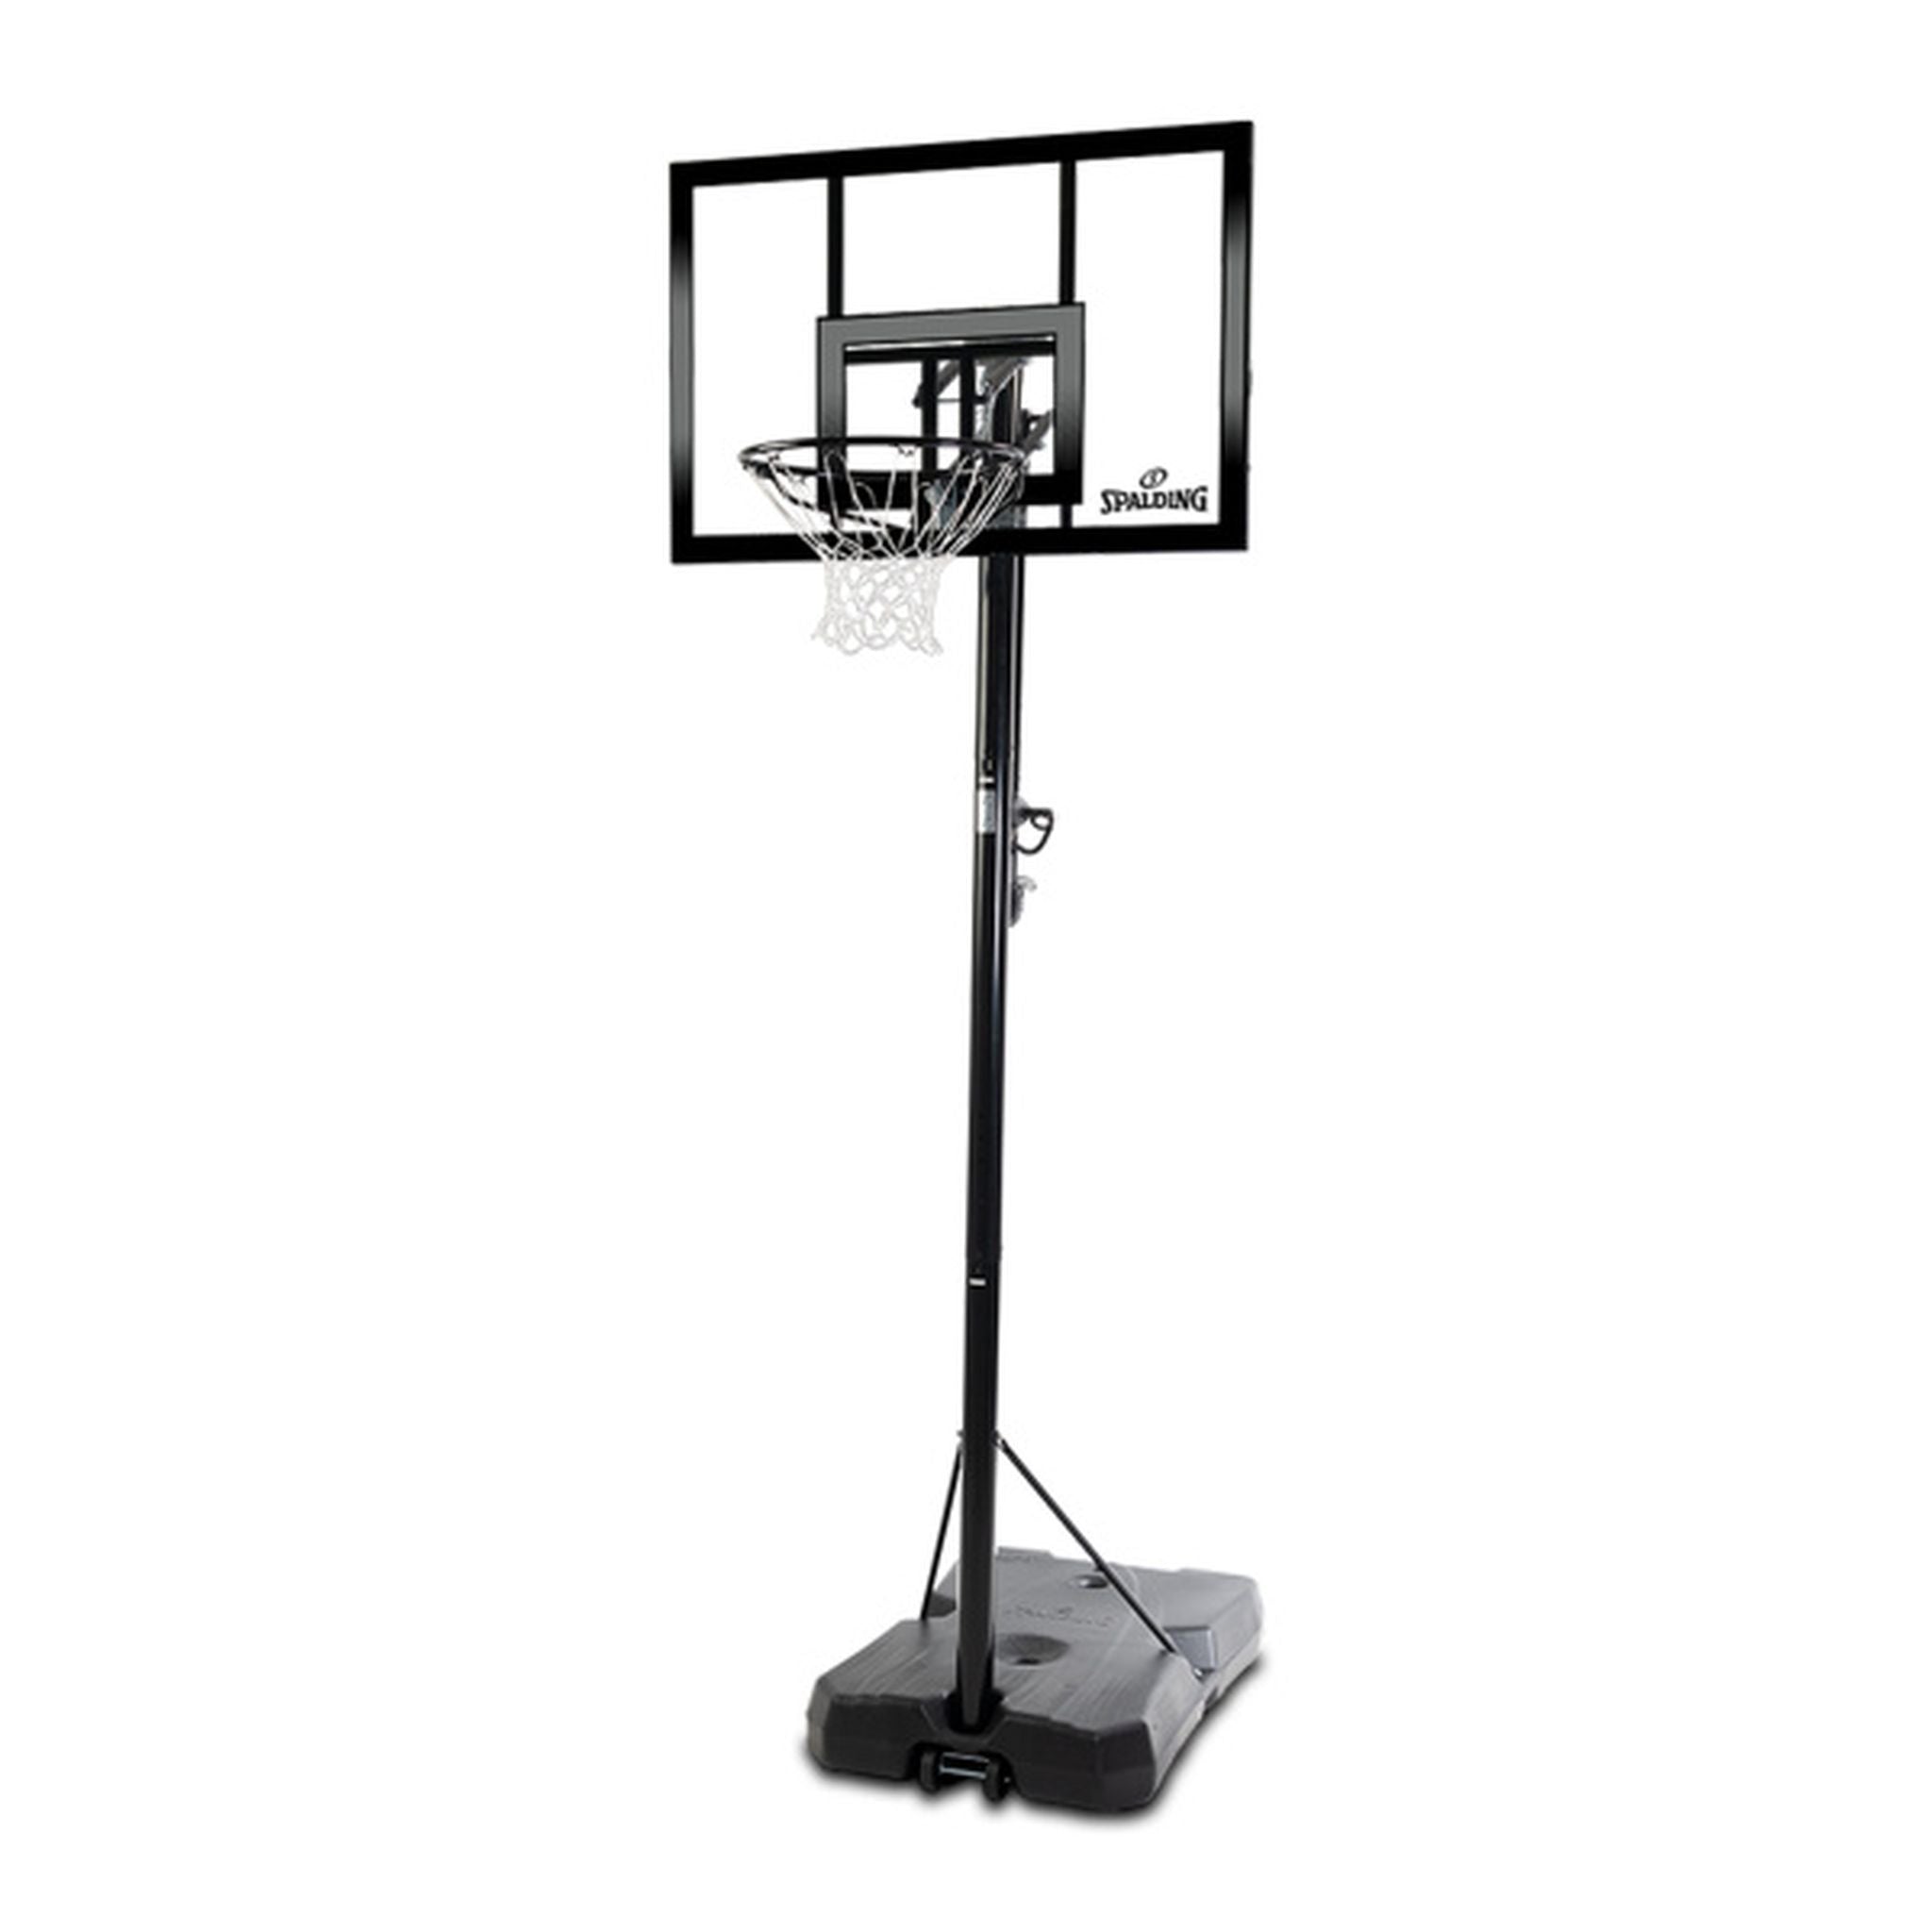 Spalding 44-inch Exactaheight Polycarbonate Portable Basketball System